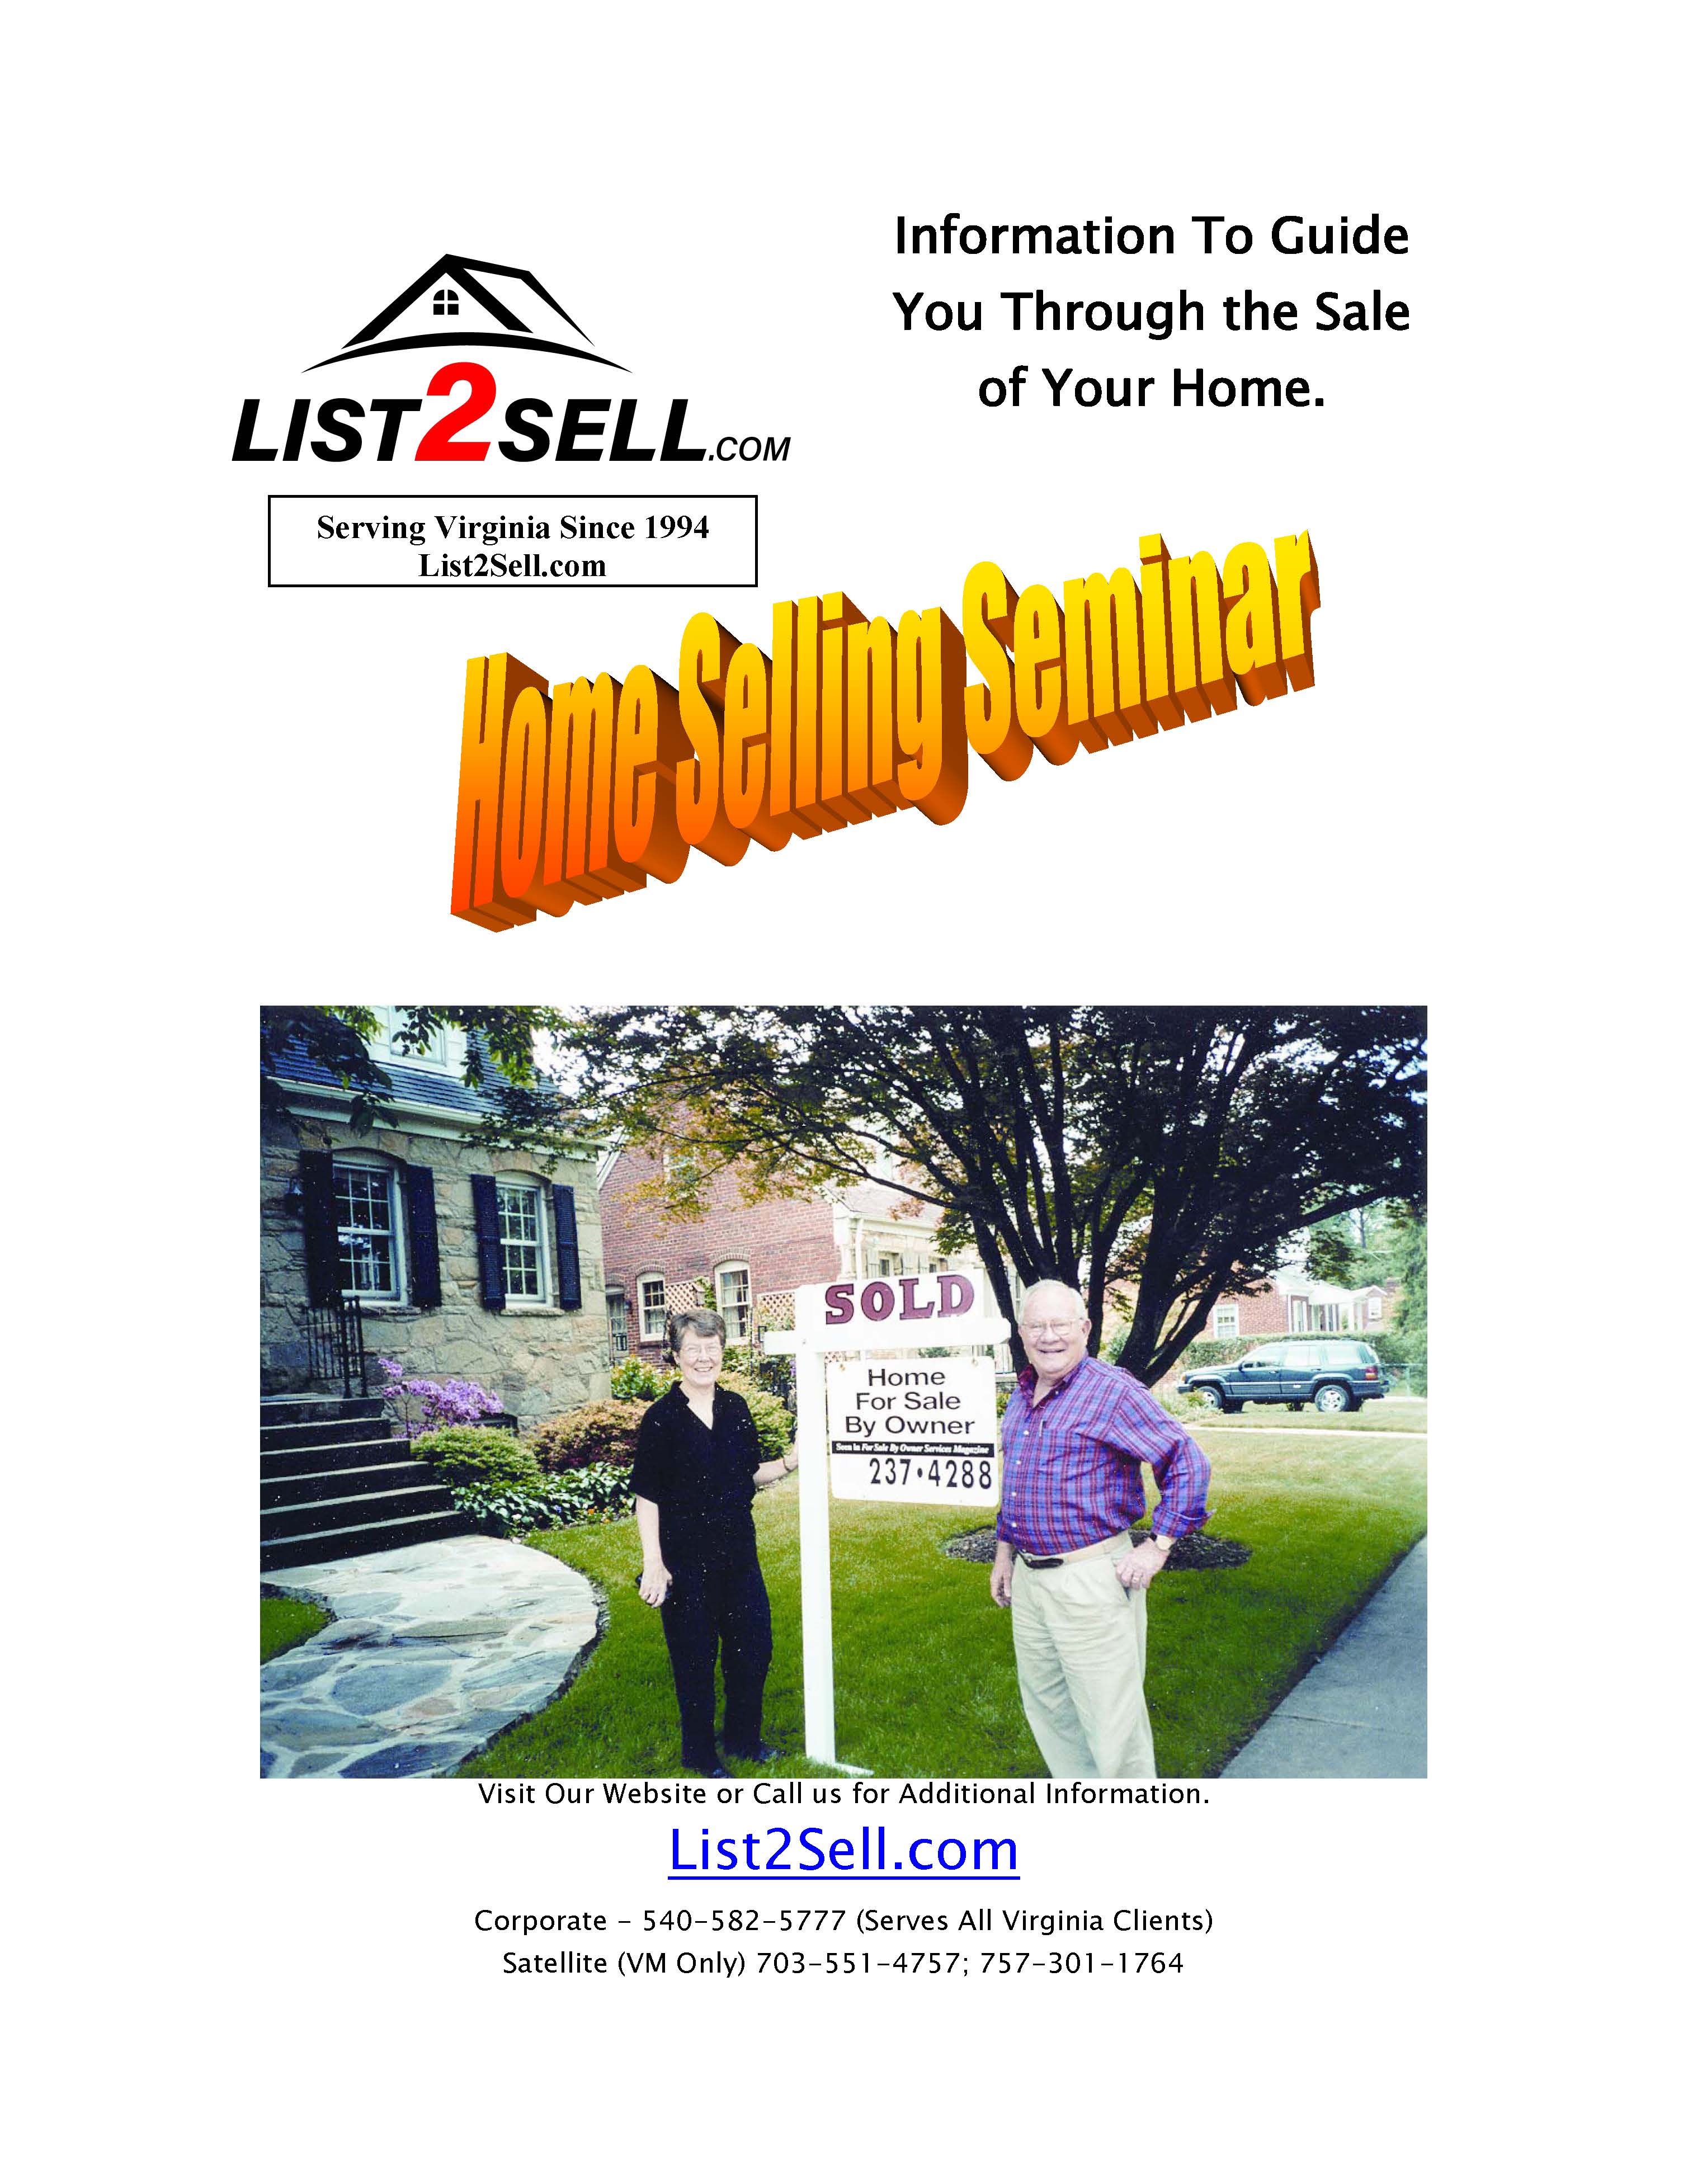 For Sale By Owner Home Selling Success Kit for Flat Fee MLS Listings